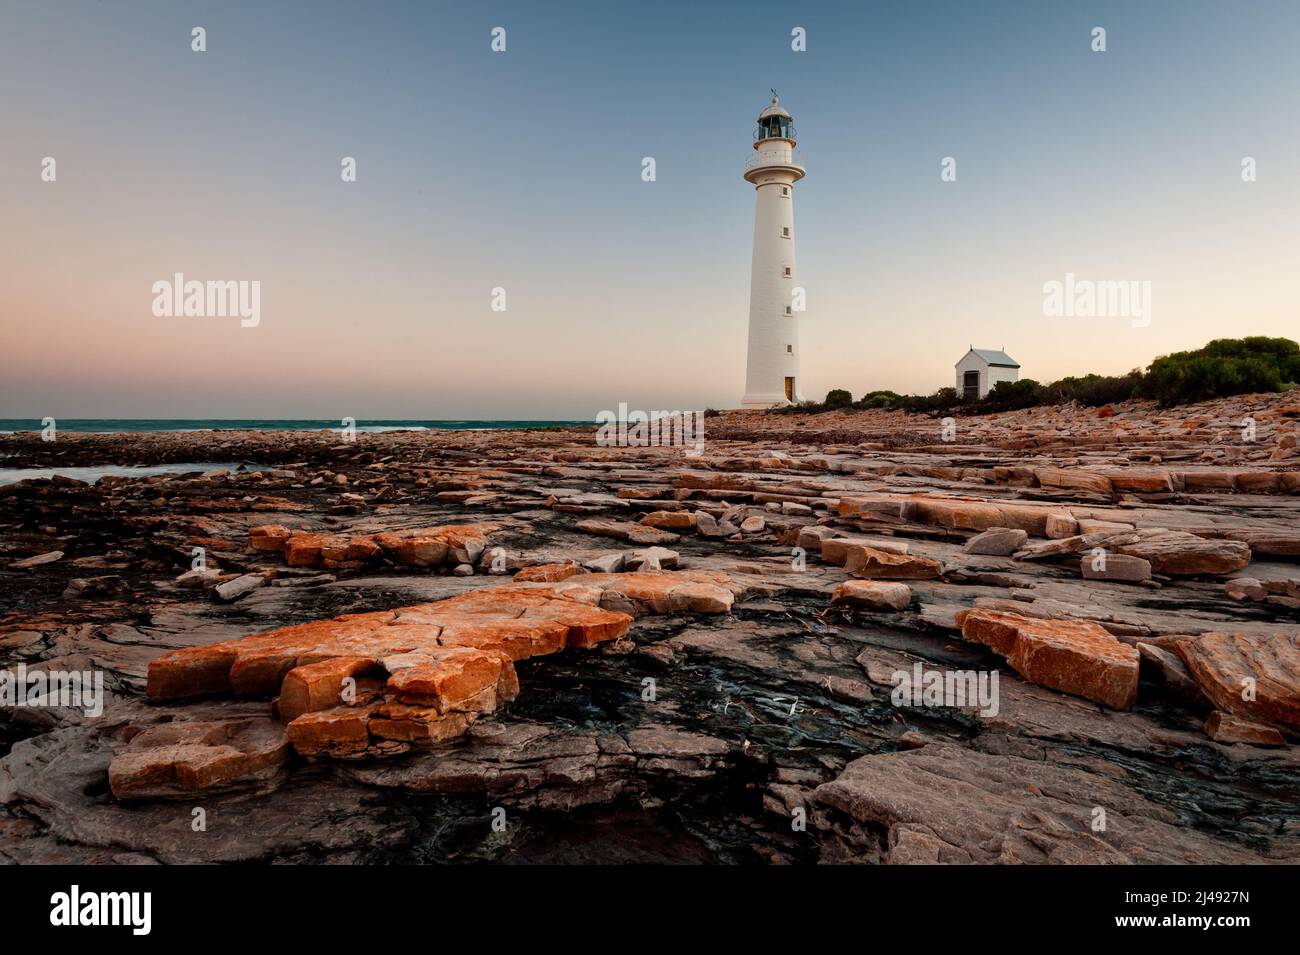 Remote Point Lowly Lighthouse on Eyre Peninsula. Stock Photo